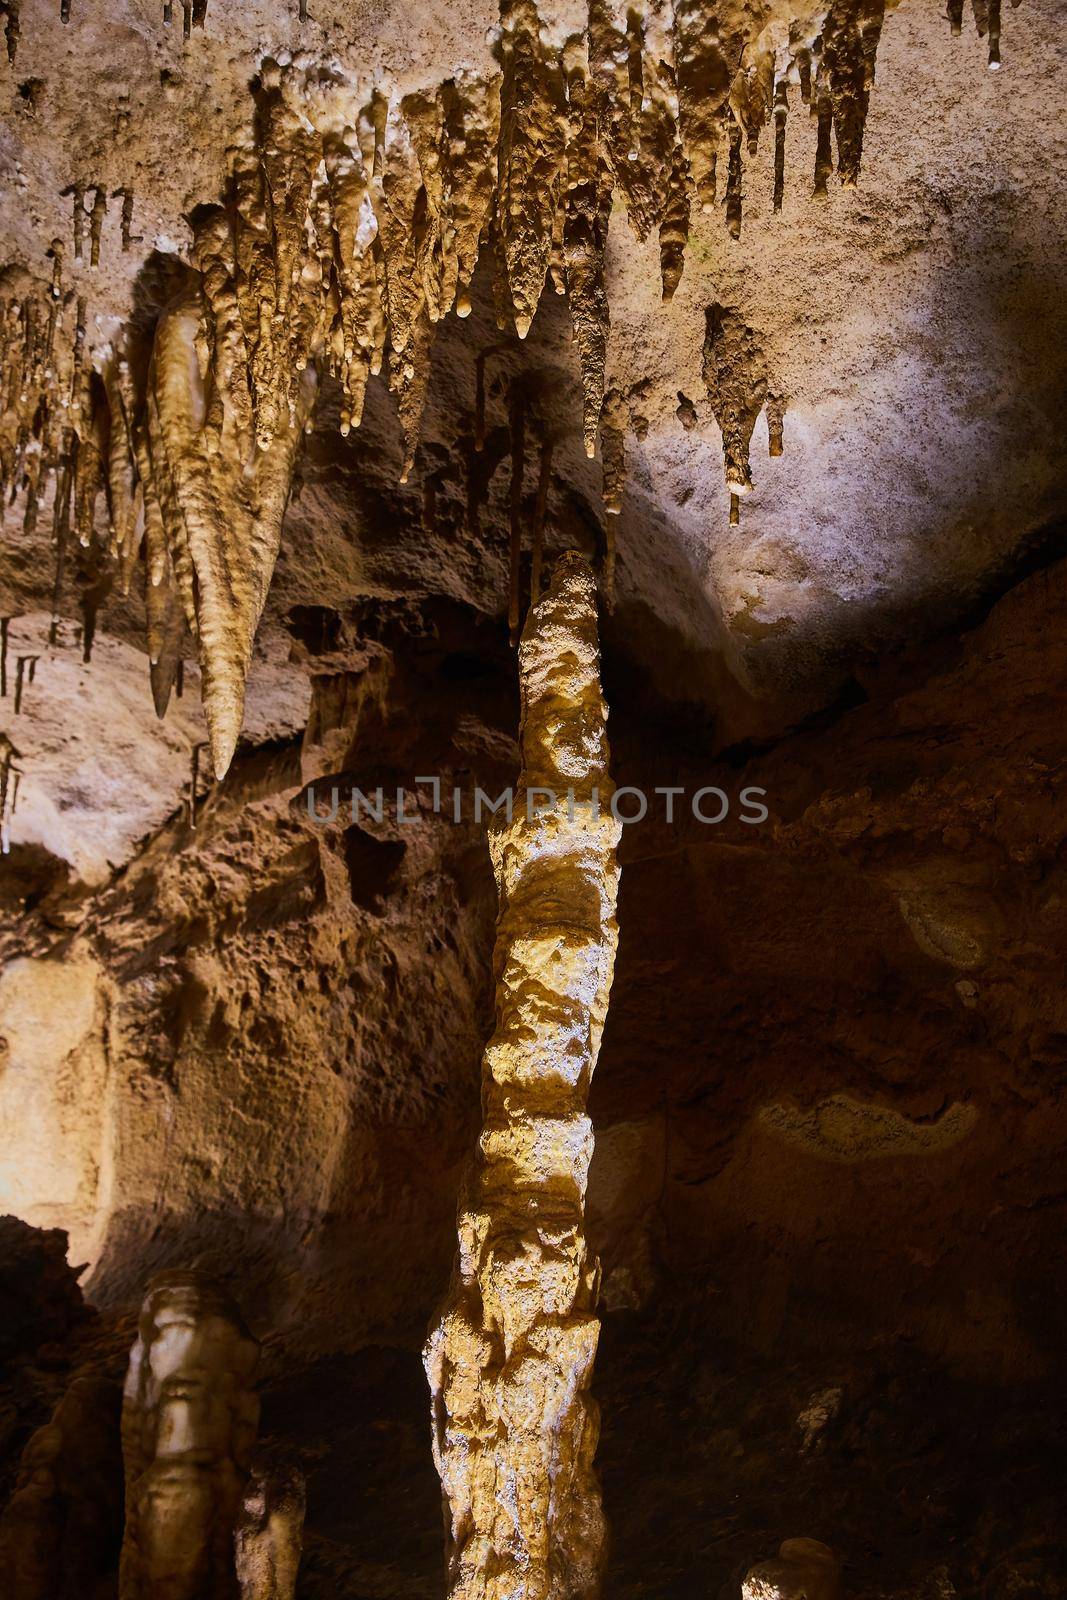 Image of Large stalagmite and stalactites in golden cave